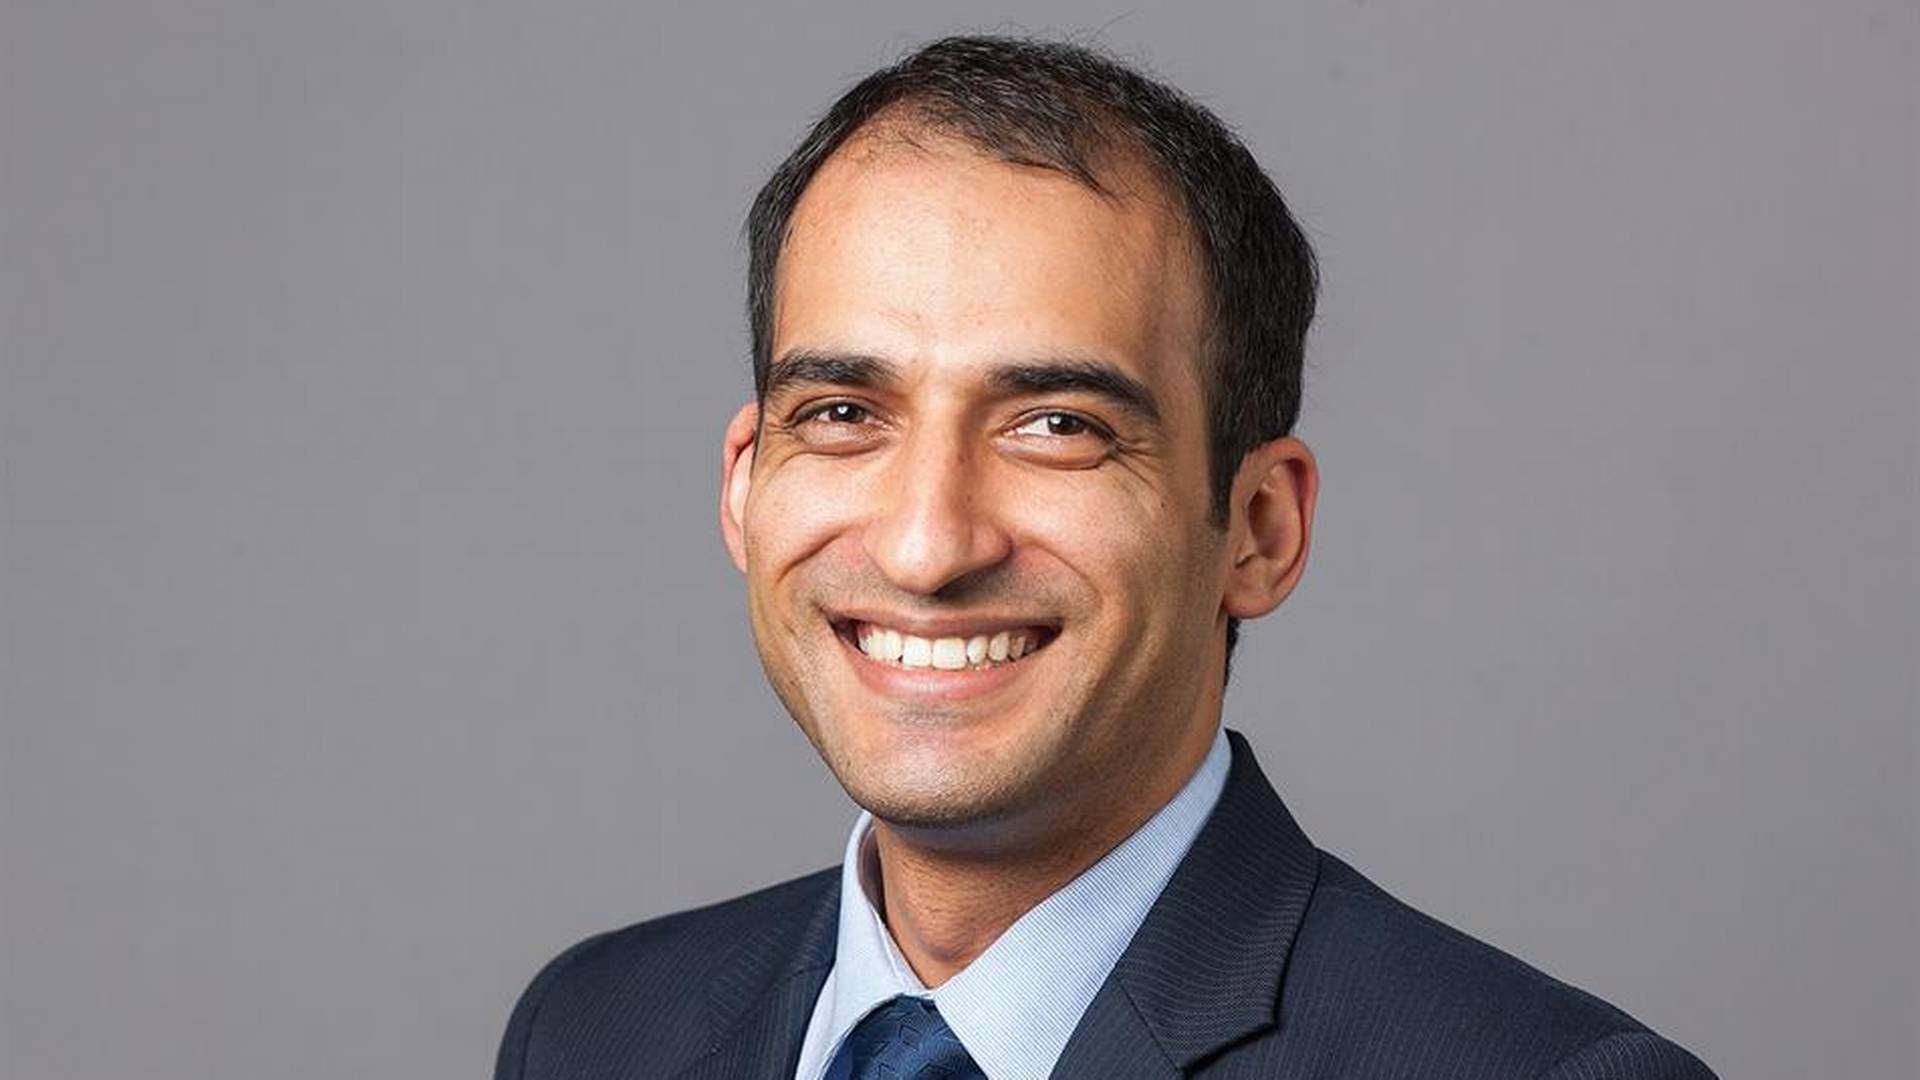 On June 1, Senvion's former CFO Manav Sharma started as US country manager for Nordex. Soon he will have a new factory at his disposal. | Photo: Senvion